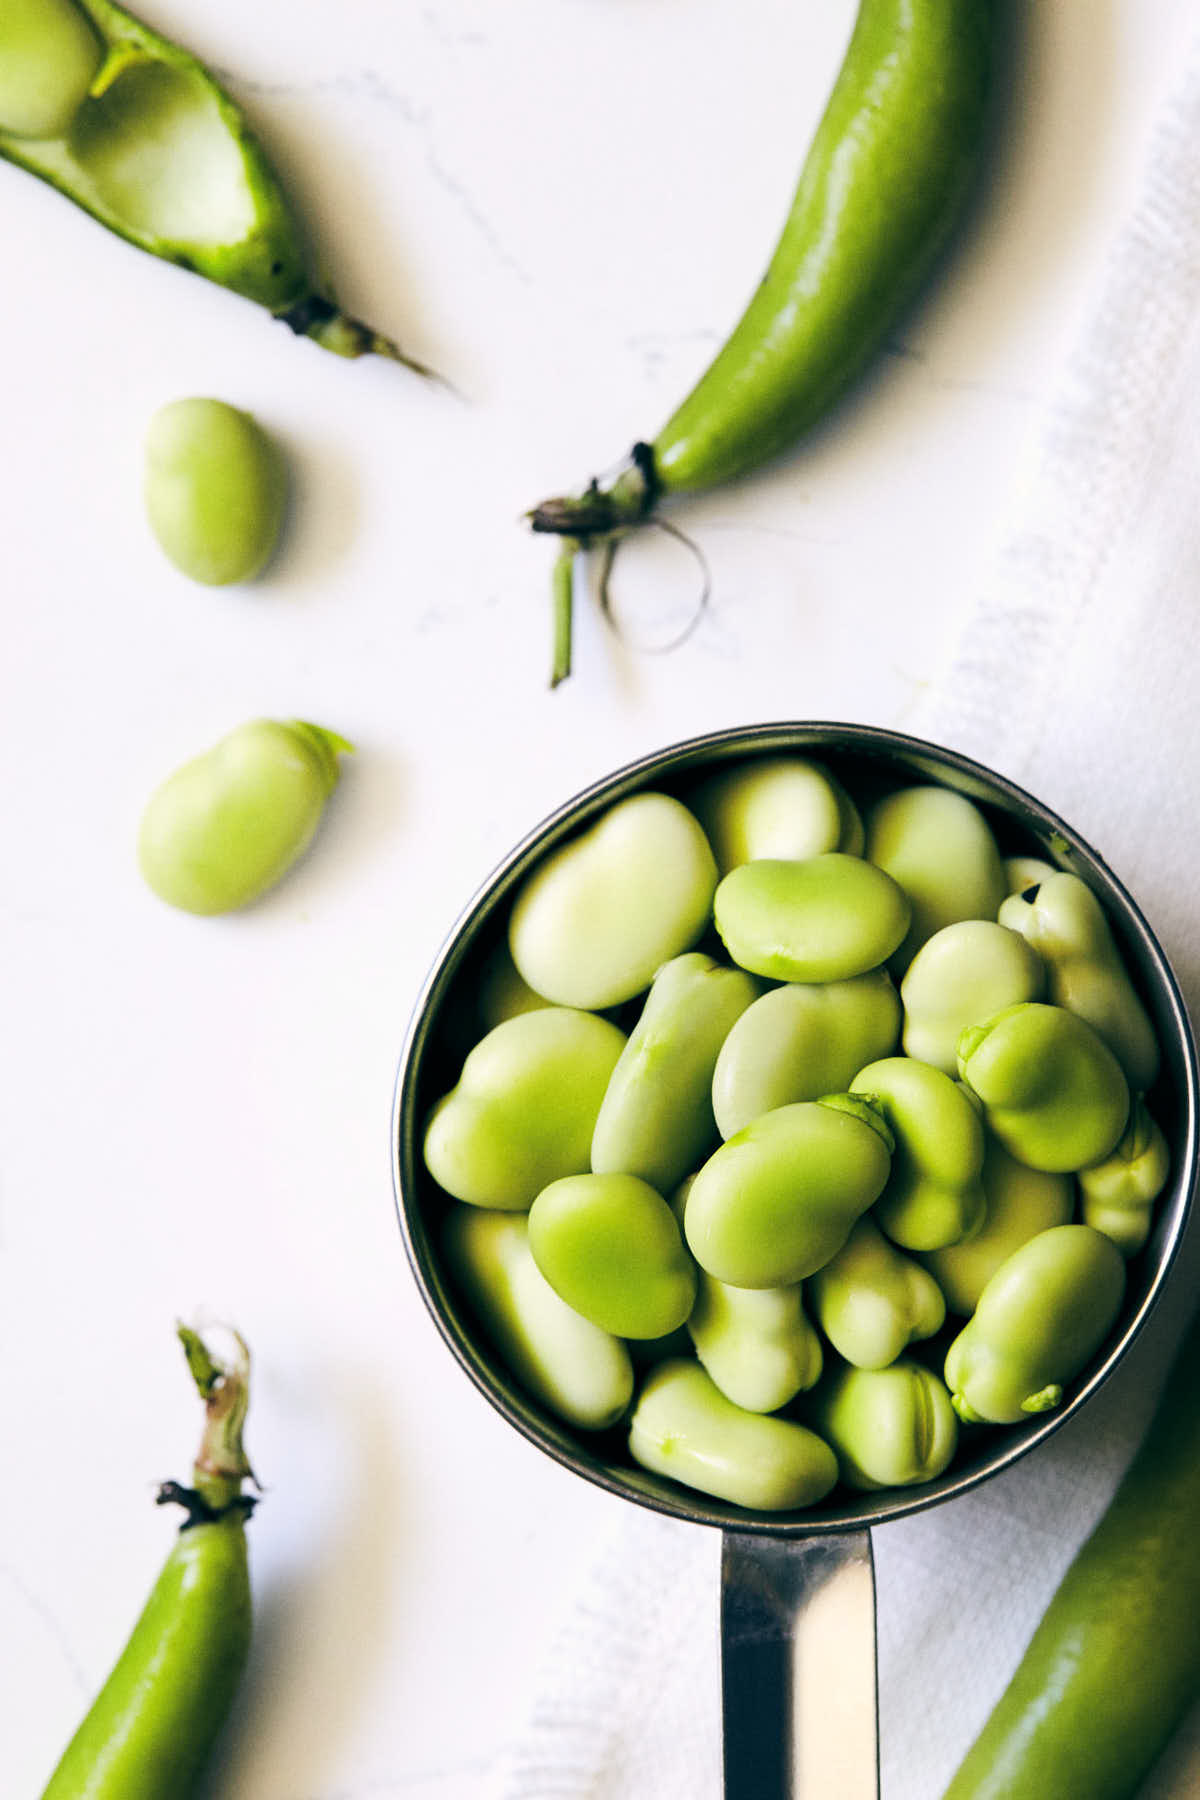 Fava beans to be used in succotash